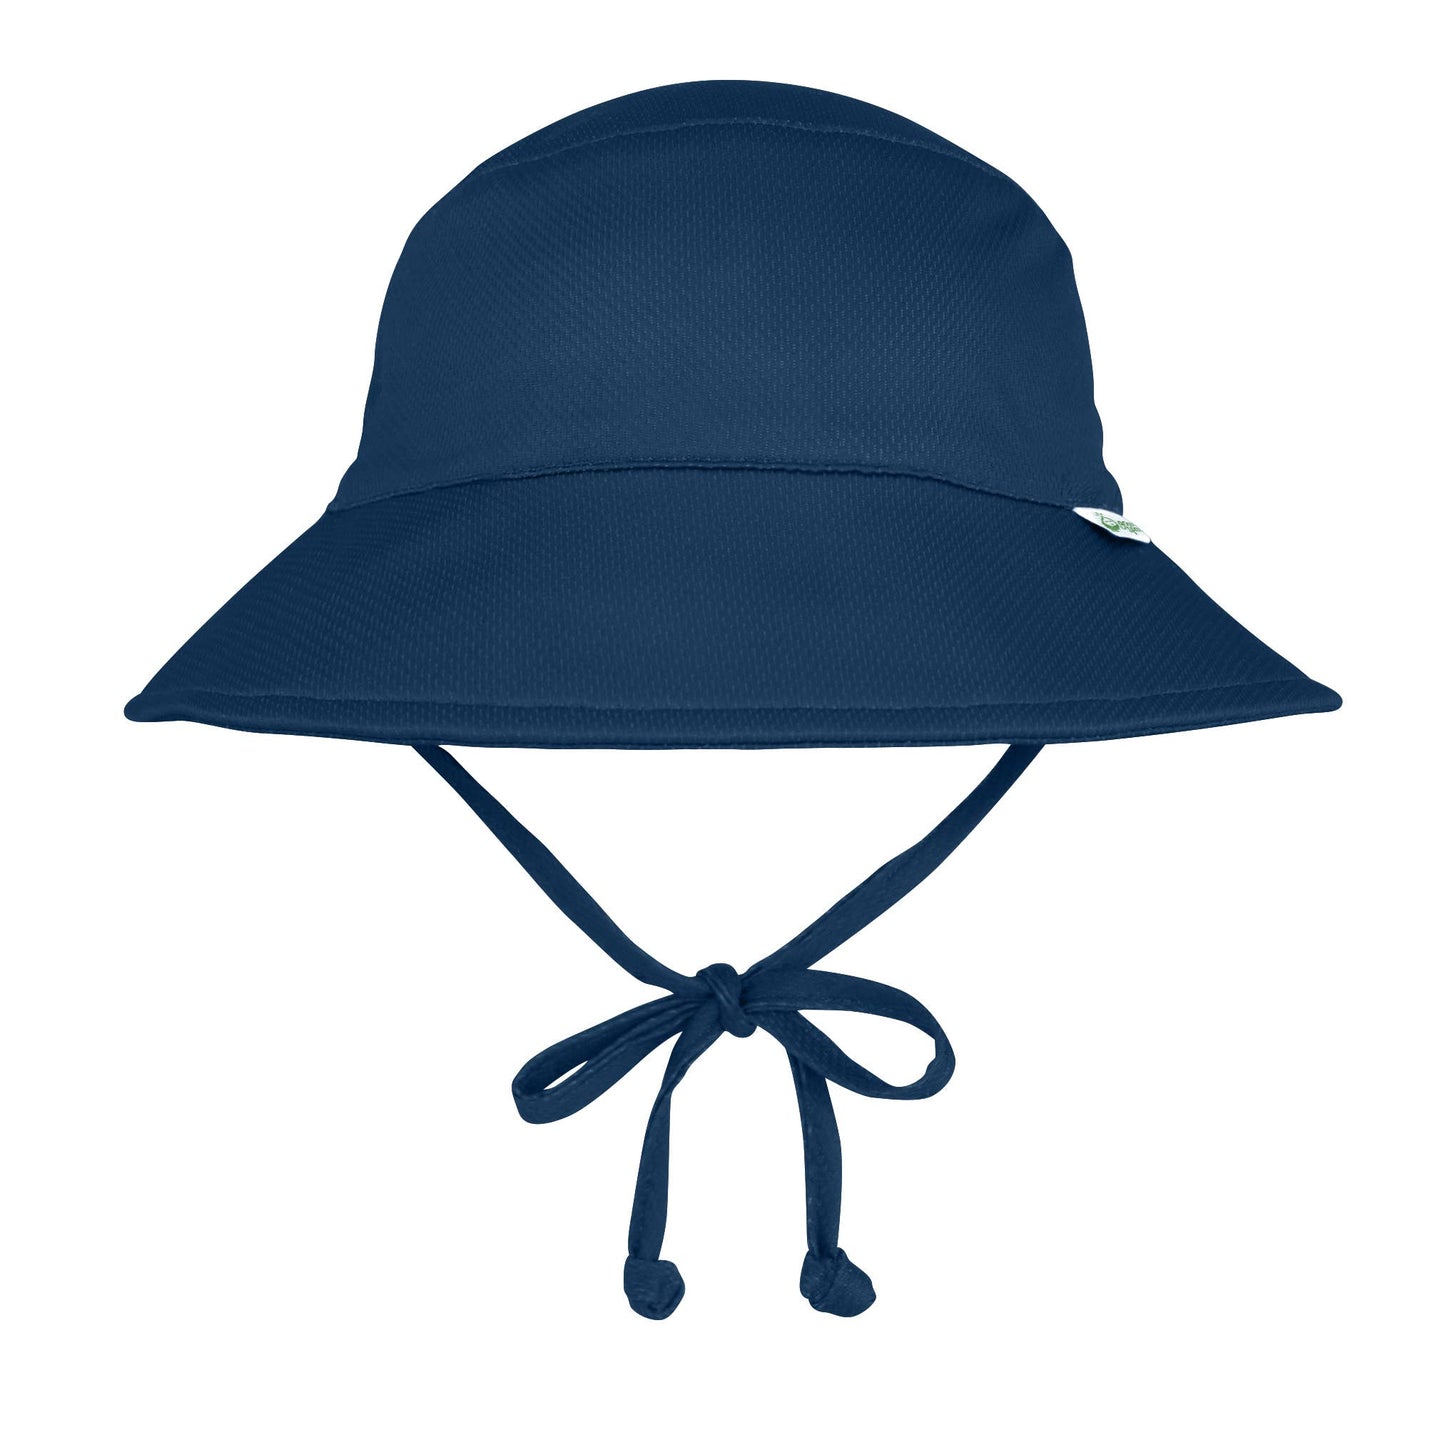 Green Sprouts, Inc. - Breathable Bucket Sun Protection Hat